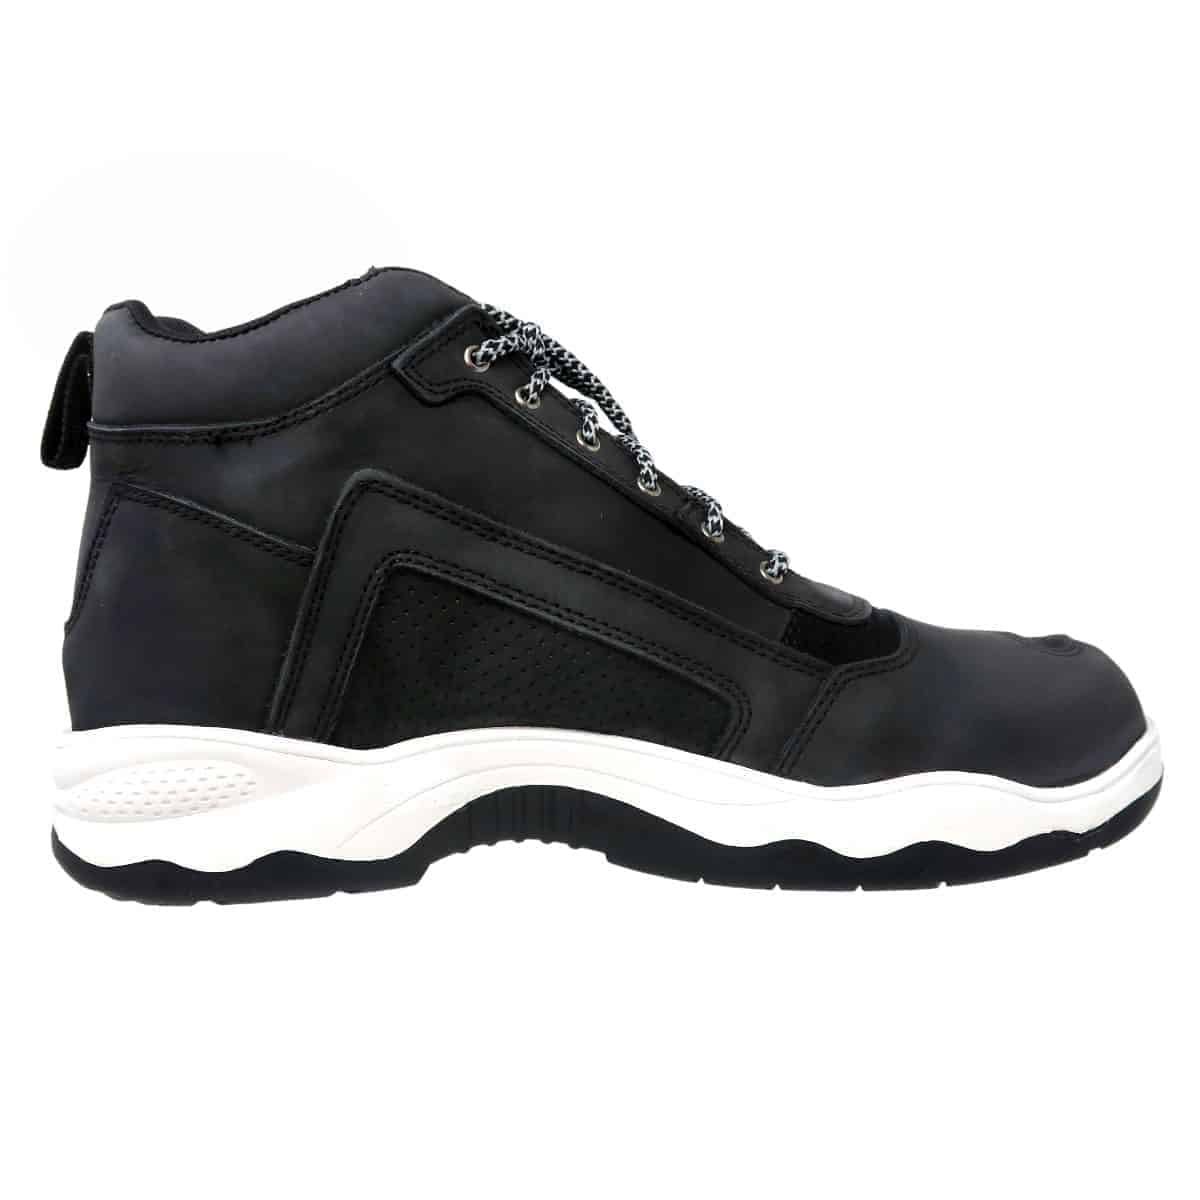 The Spada Mercury motorcycle trainers are an awesome addition to the casual riding boots category.